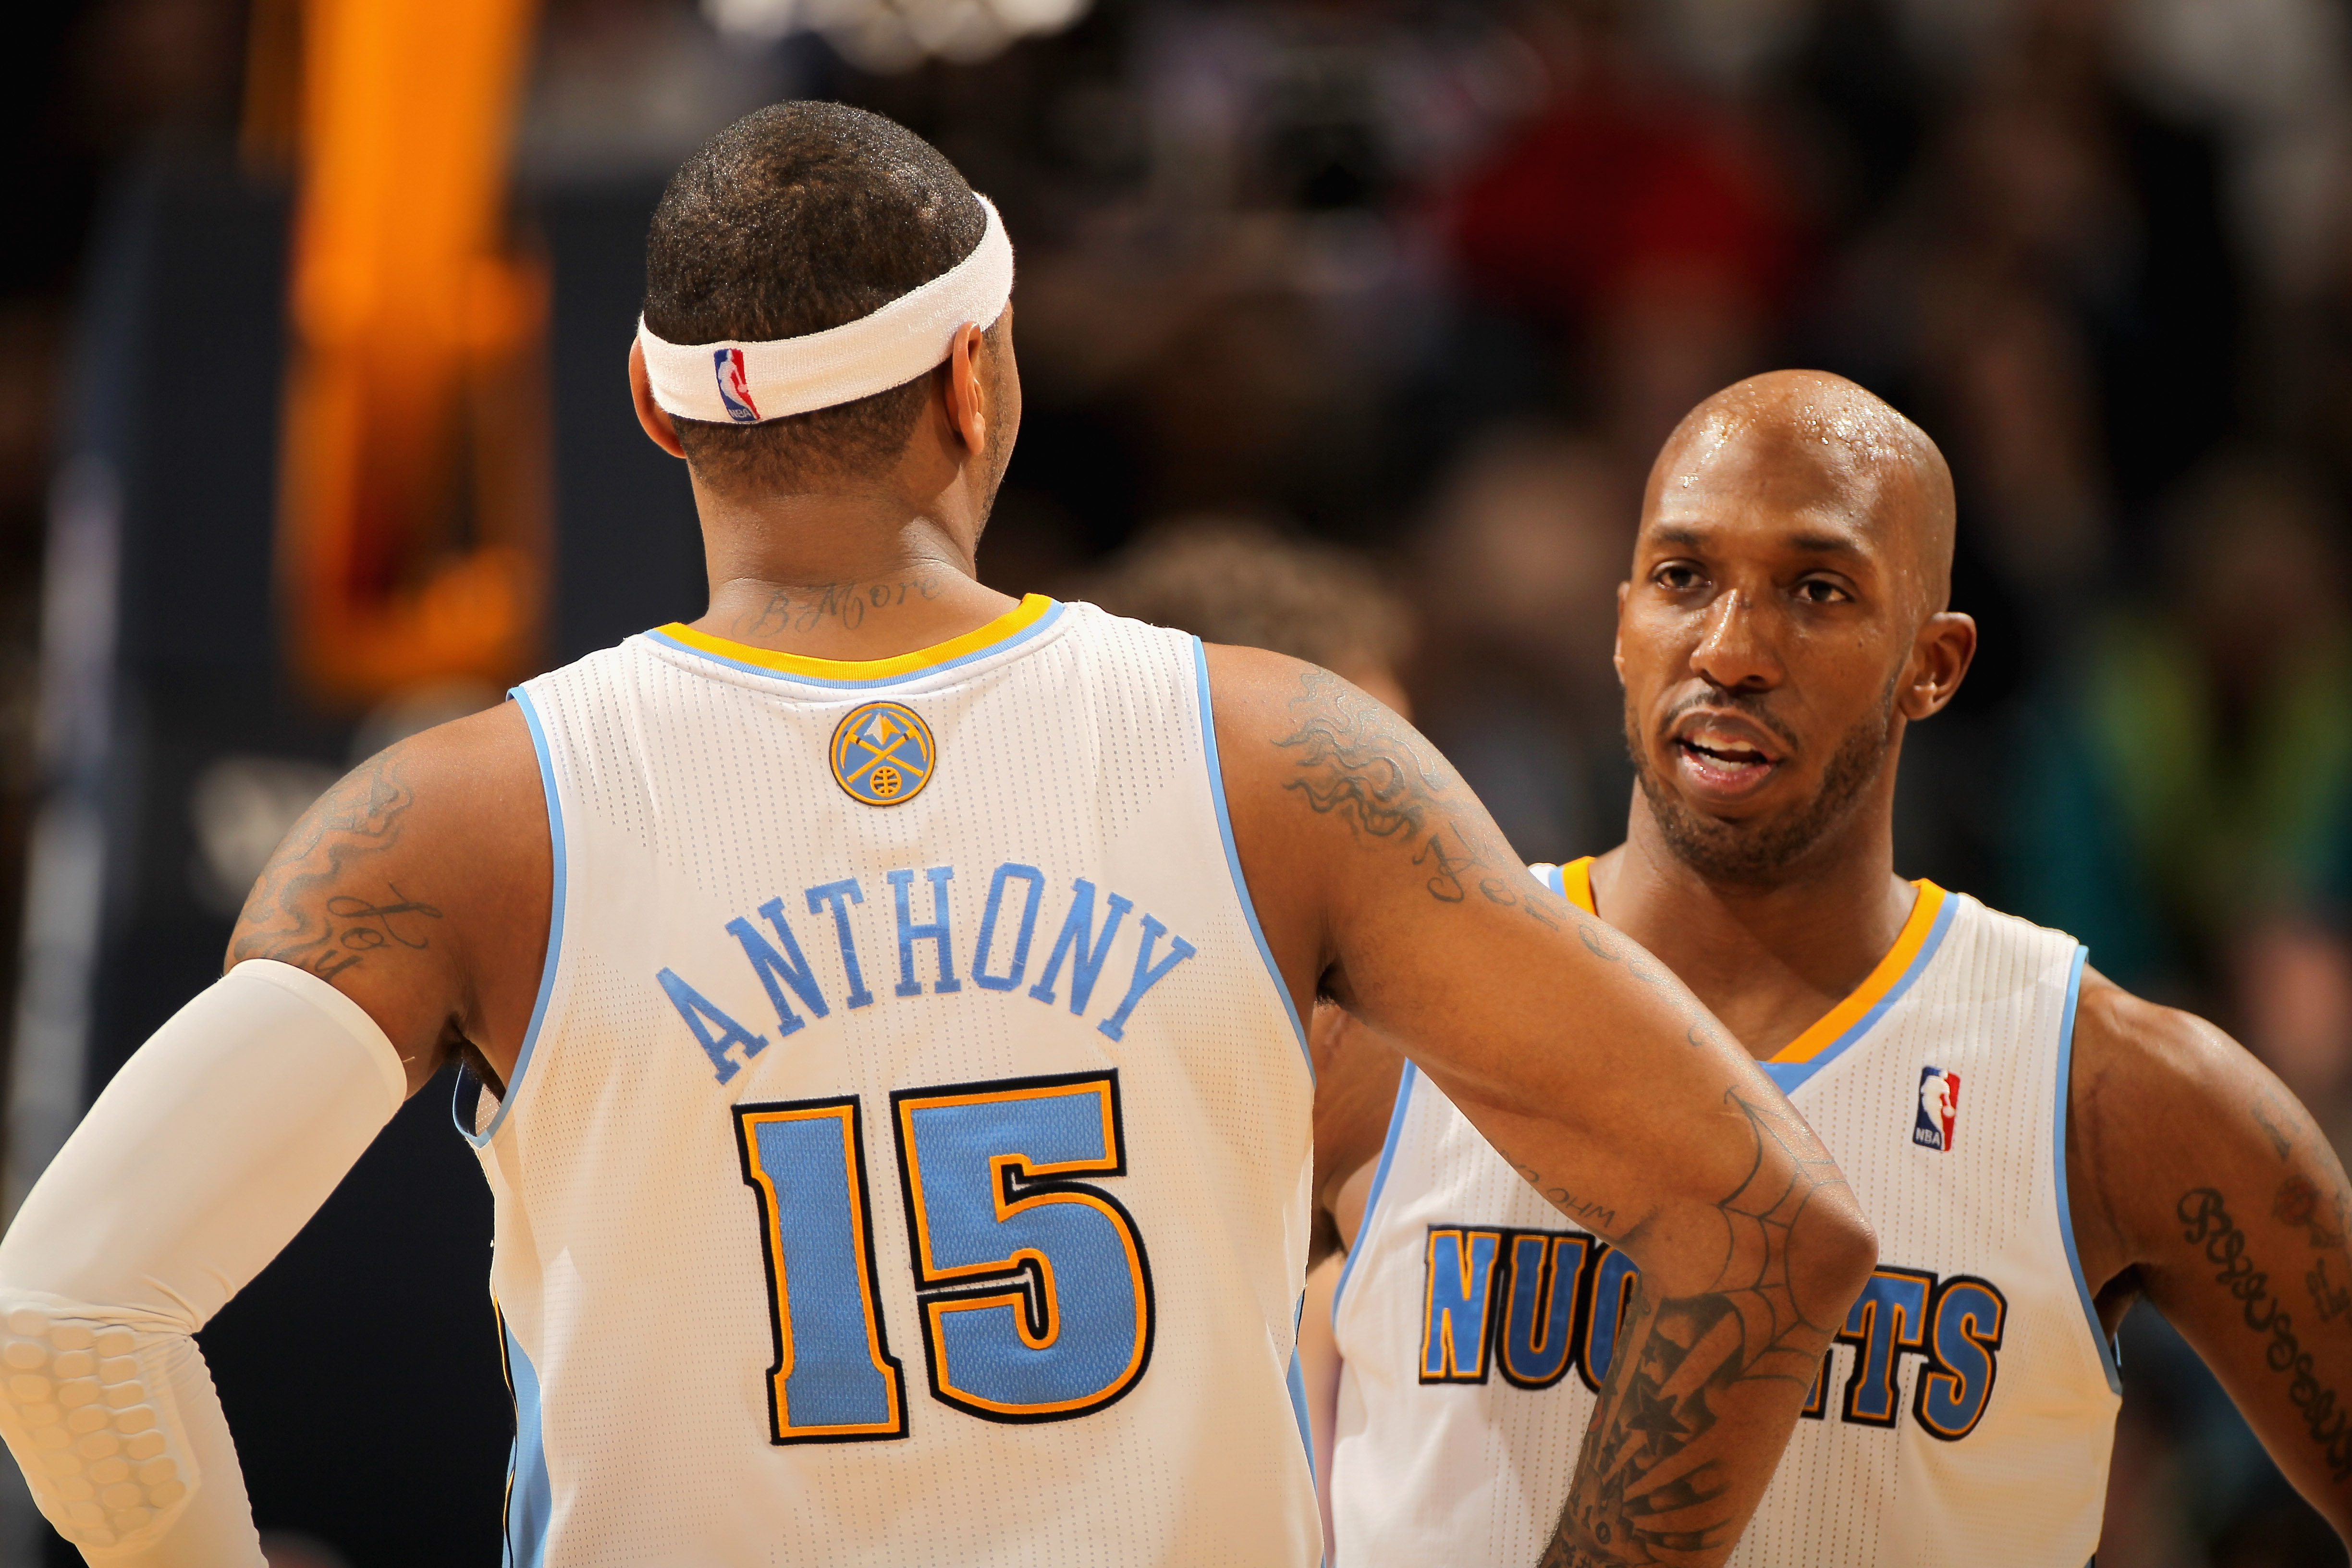 DENVER, CO - JANUARY 21:  Carmelo Anthony #15 and Chauncey Billups #1 of the Denver Nuggets talk during a break in the action against the Los Angeles Lakers at the Pepsi Center on January 21, 2011 in Denver, Colorado. The Lakers defeated the Nuggets 107-9